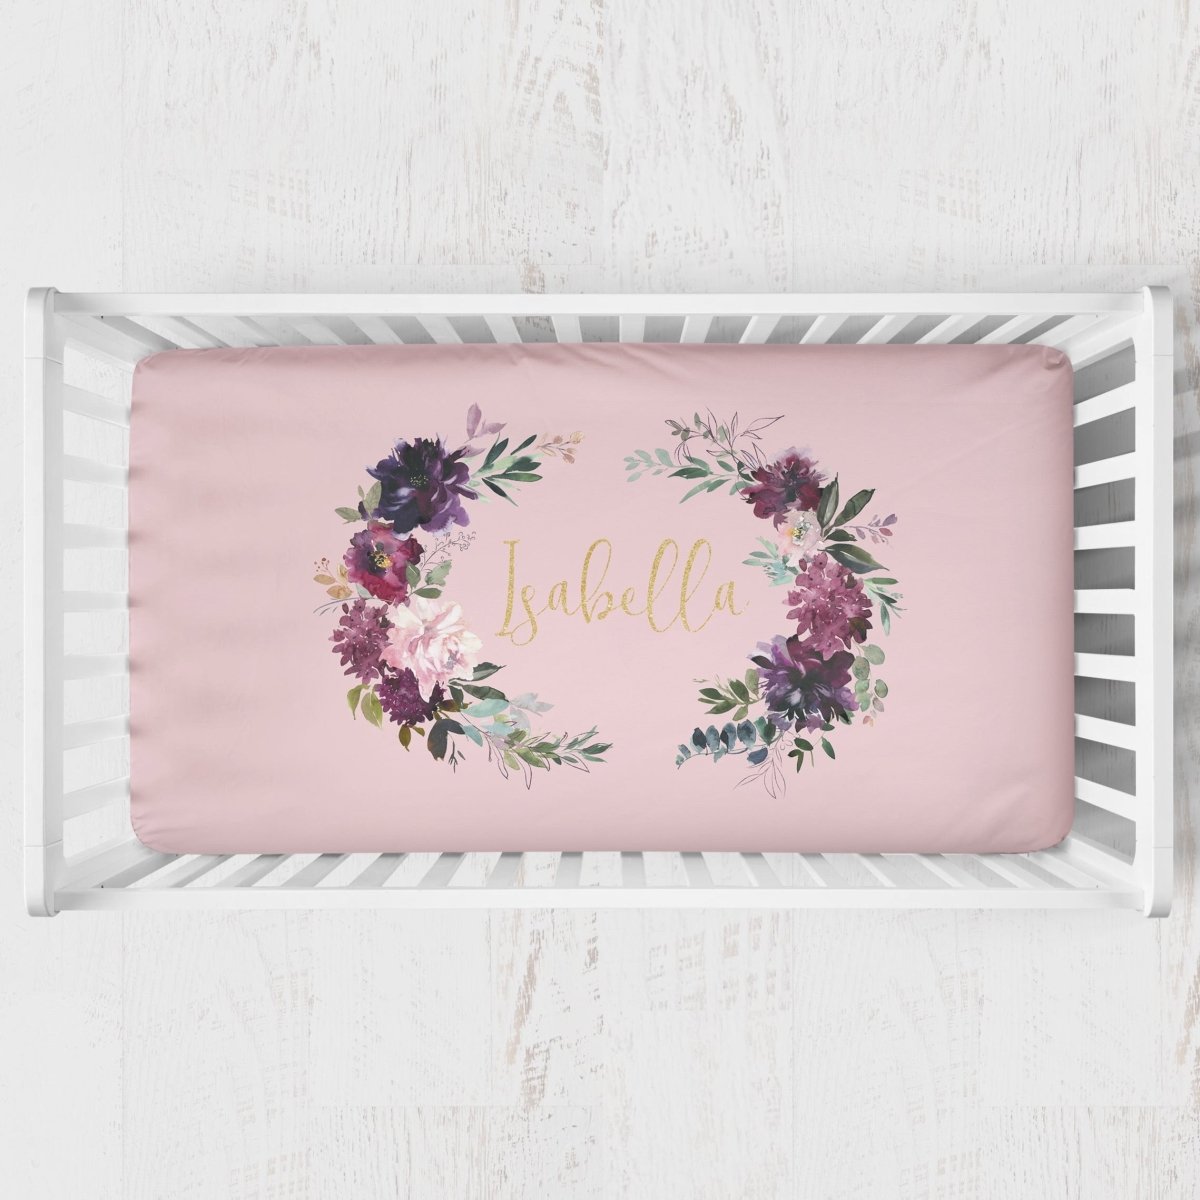 Whisper Floral Personalized Crib Sheet - gender_girl, Personalized_Yes, text